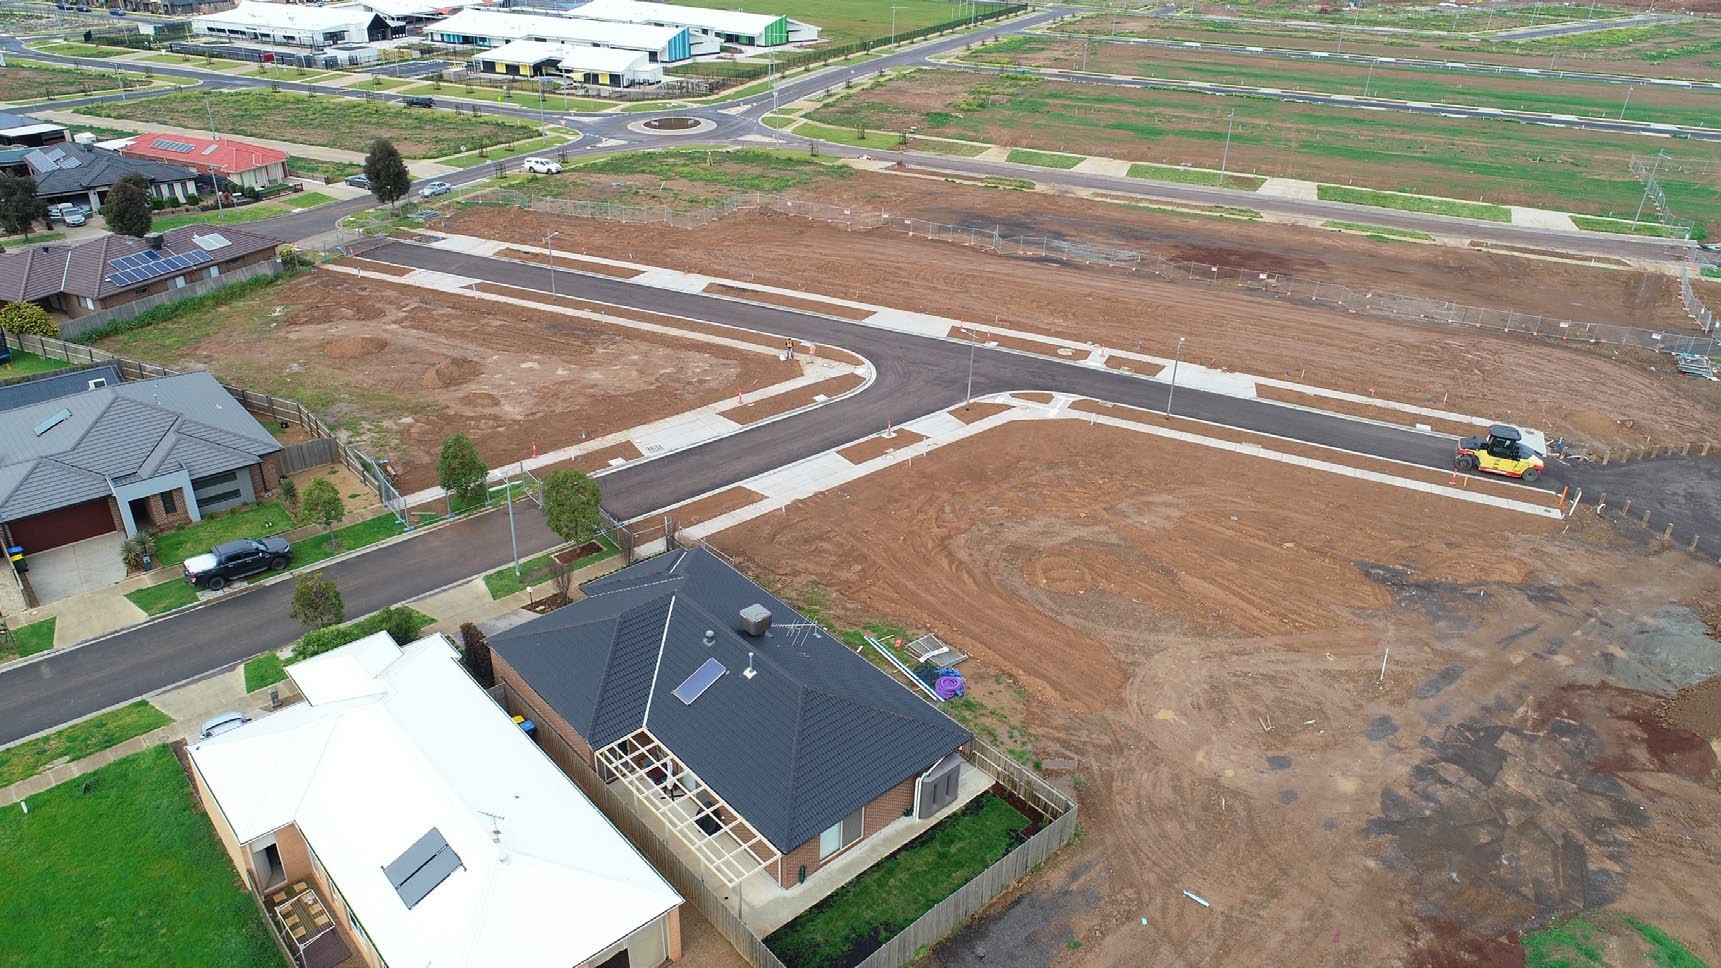 Drone photo of Stage 23A taken on 6 July 2020